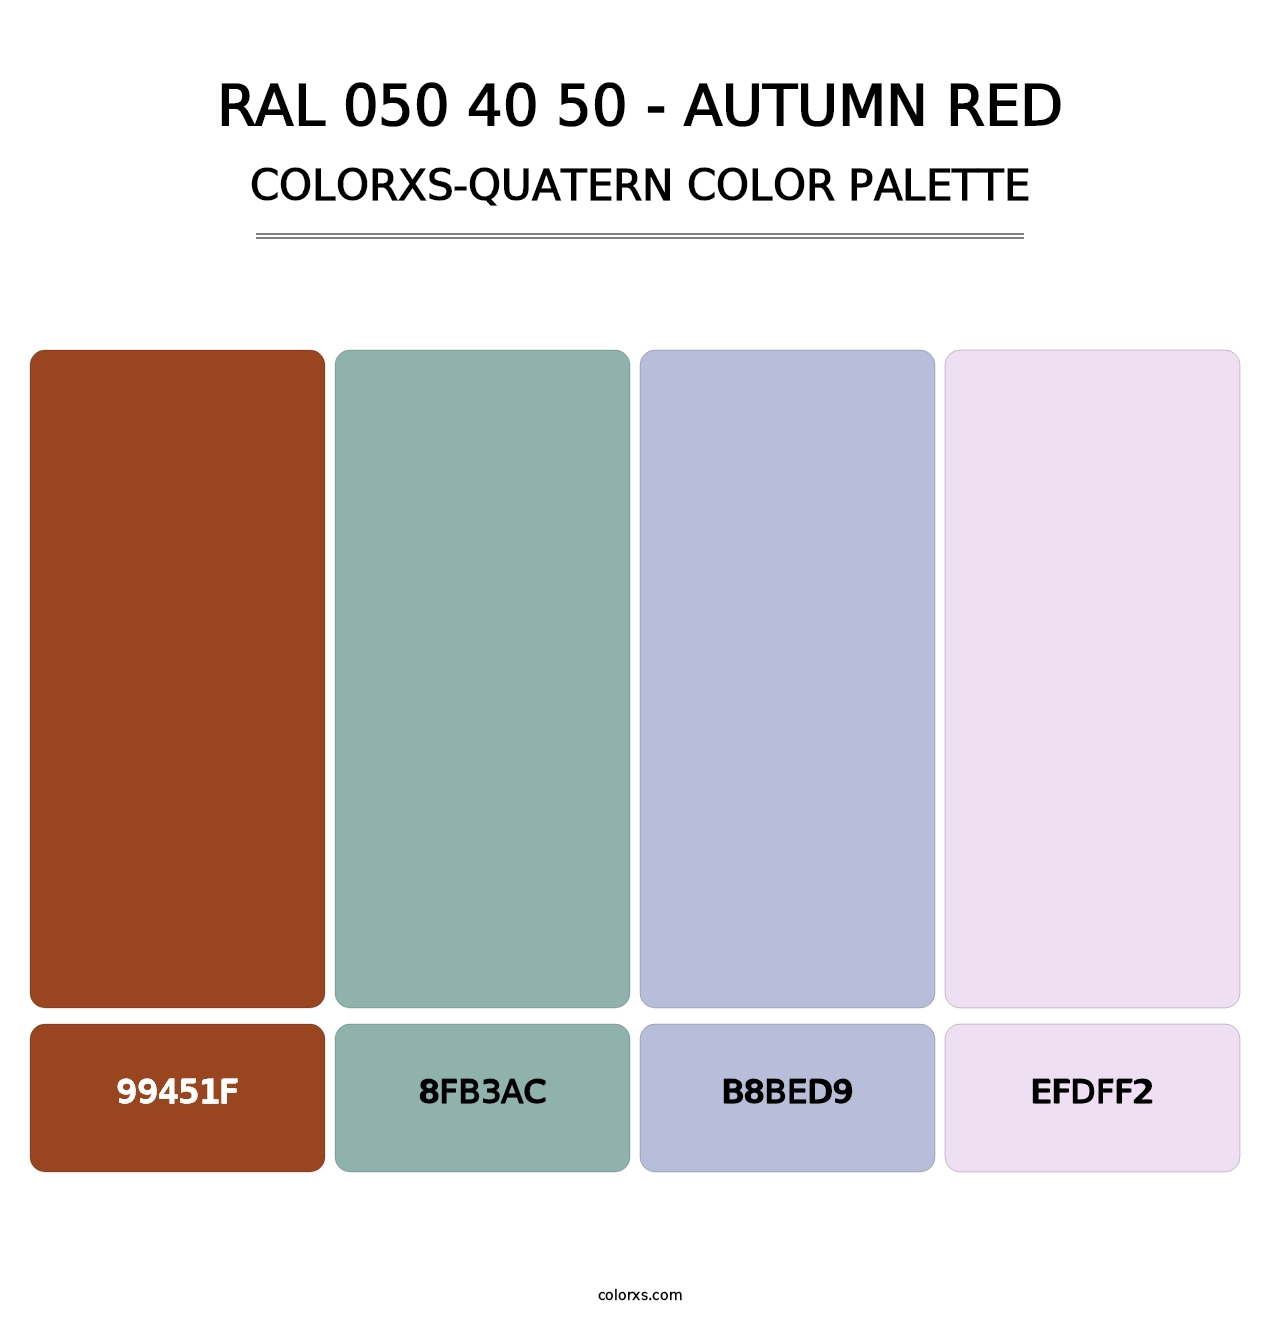 RAL 050 40 50 - Autumn Red - Colorxs Quatern Palette